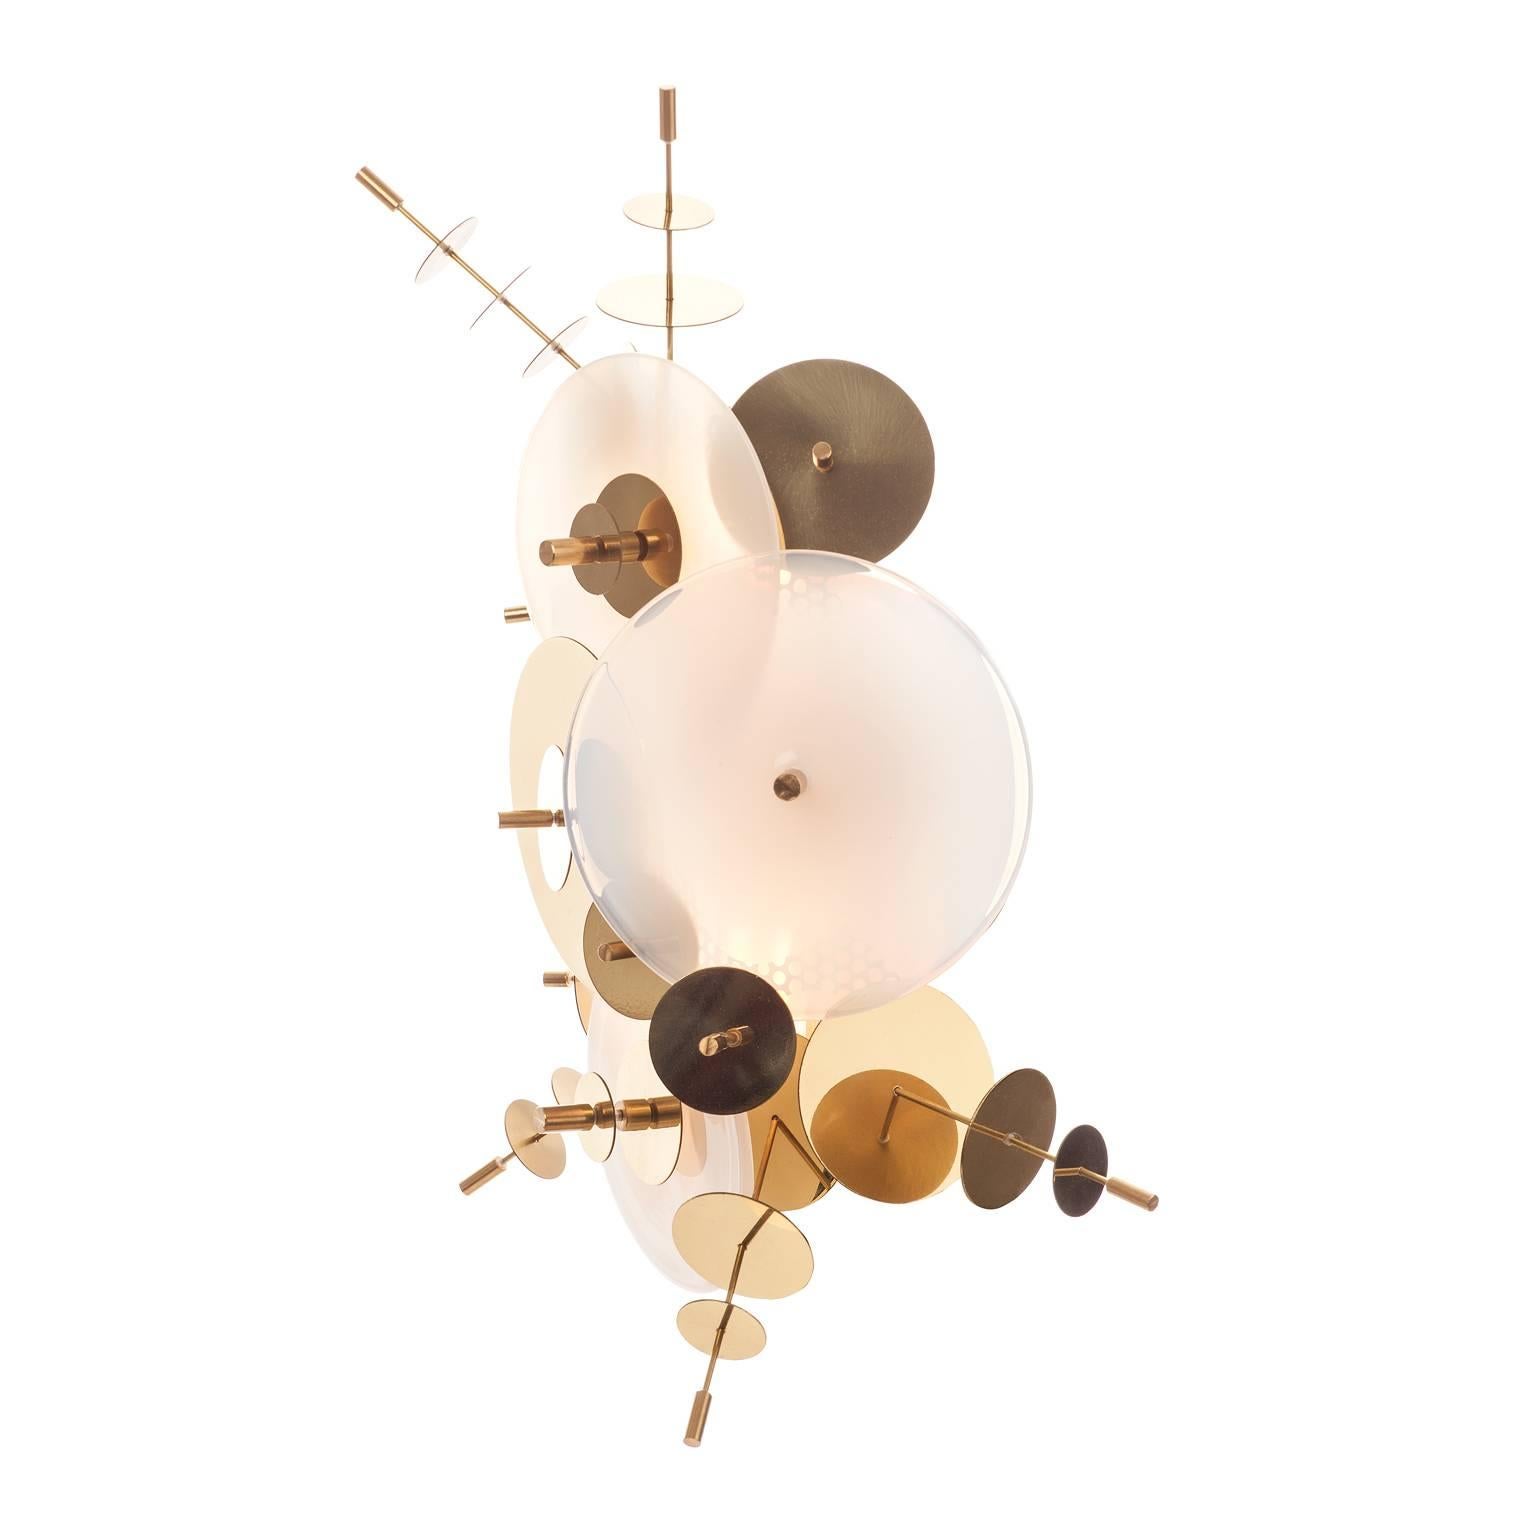 The Confetti Collection Sconce features hand blown glass discs in a variety of color palates combined with hand finished metallic disc accents.  

AVRAM RUSU STUDIO is a Brooklyn based design studio known for impeccably crafted and distinctly